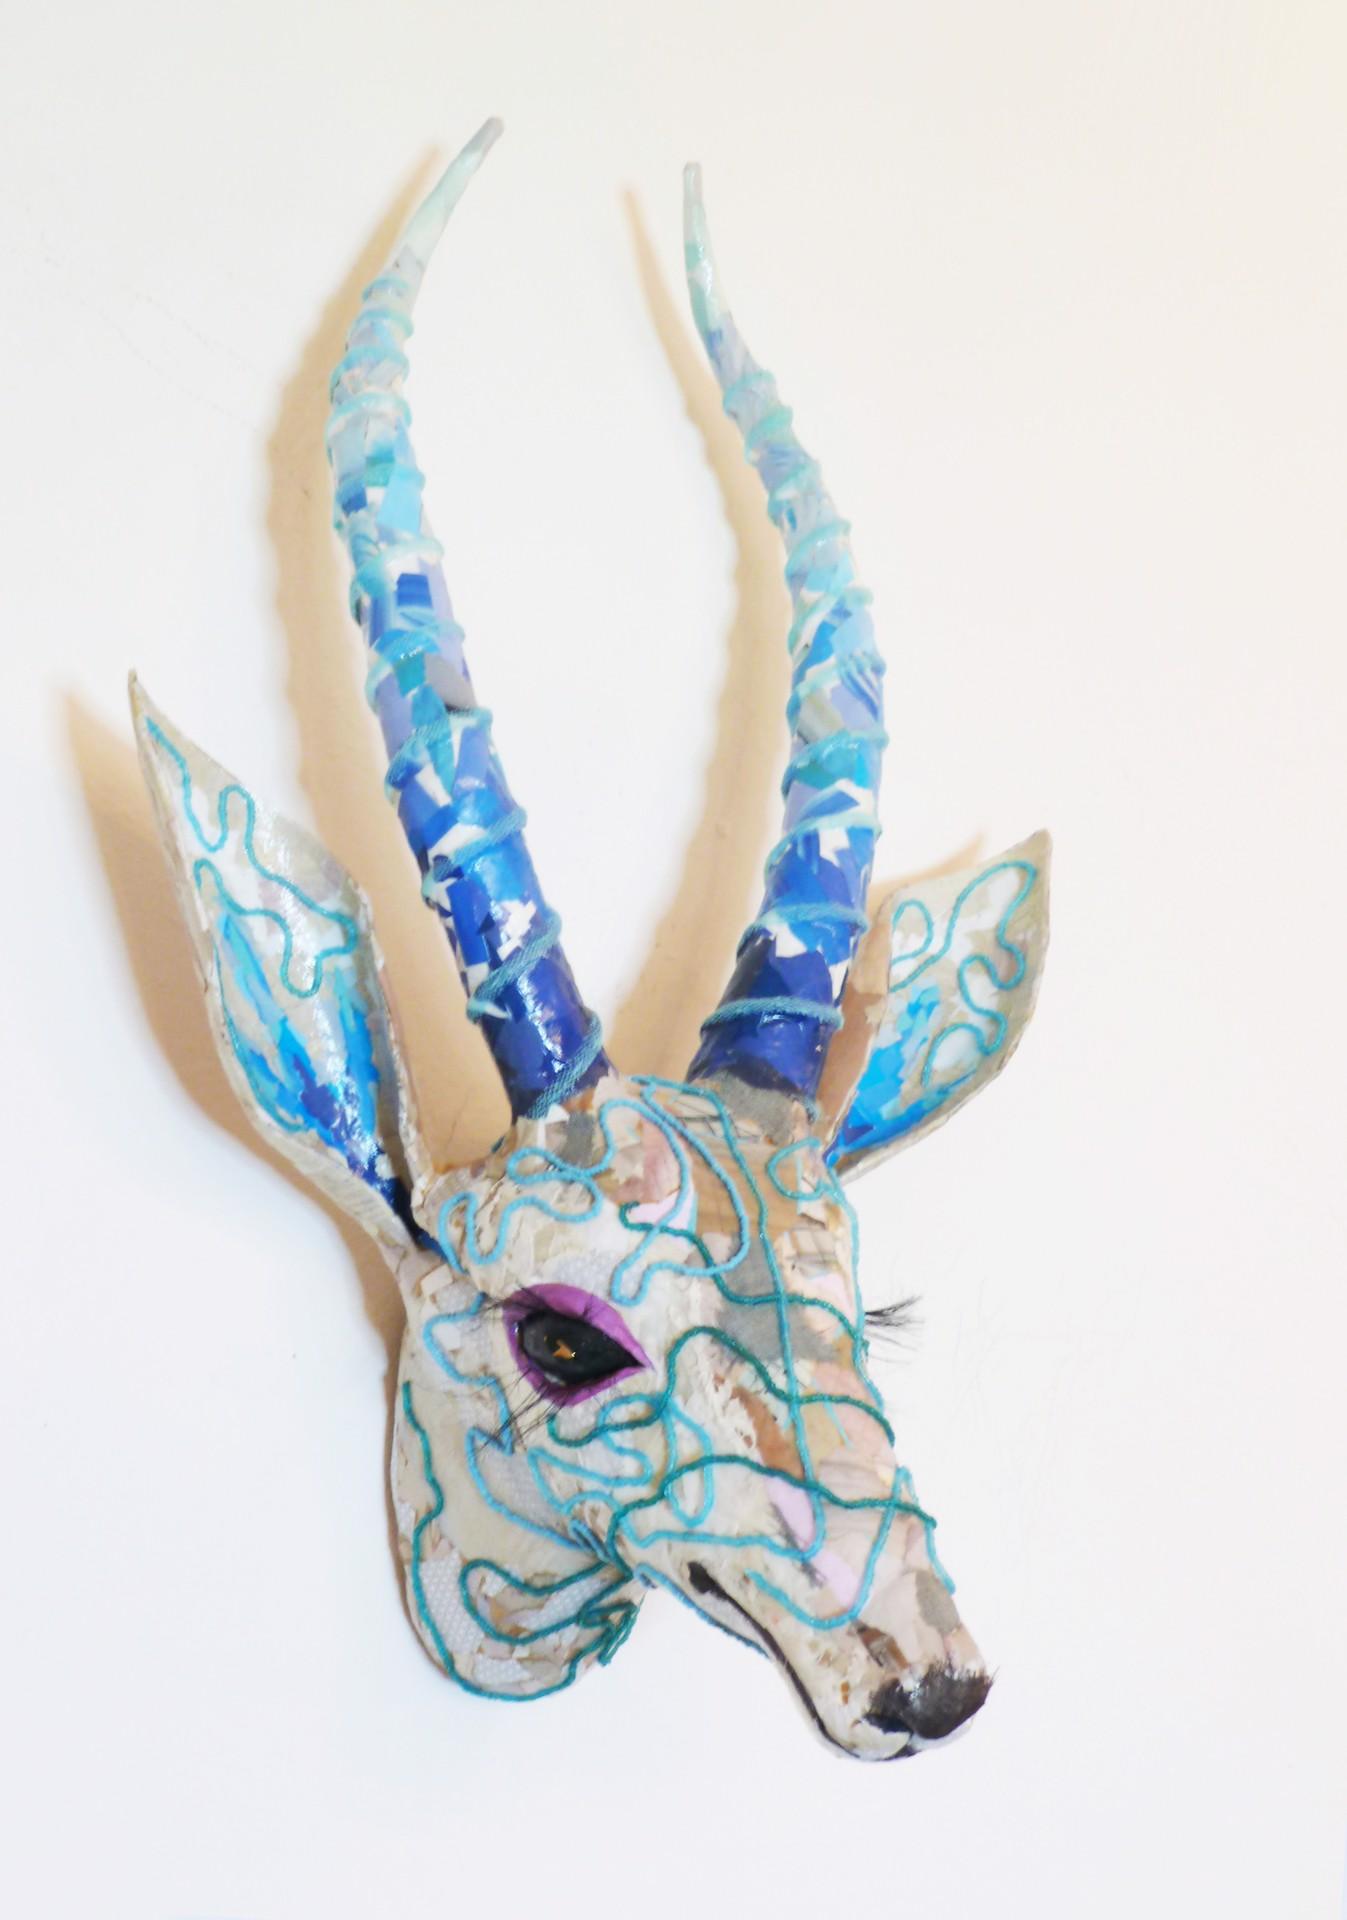 Lula - Incredible Gazelle Wall Sculpture from Up-Cycled Materials (Blue + White) - Gray Figurative Sculpture by Yulia Shtern